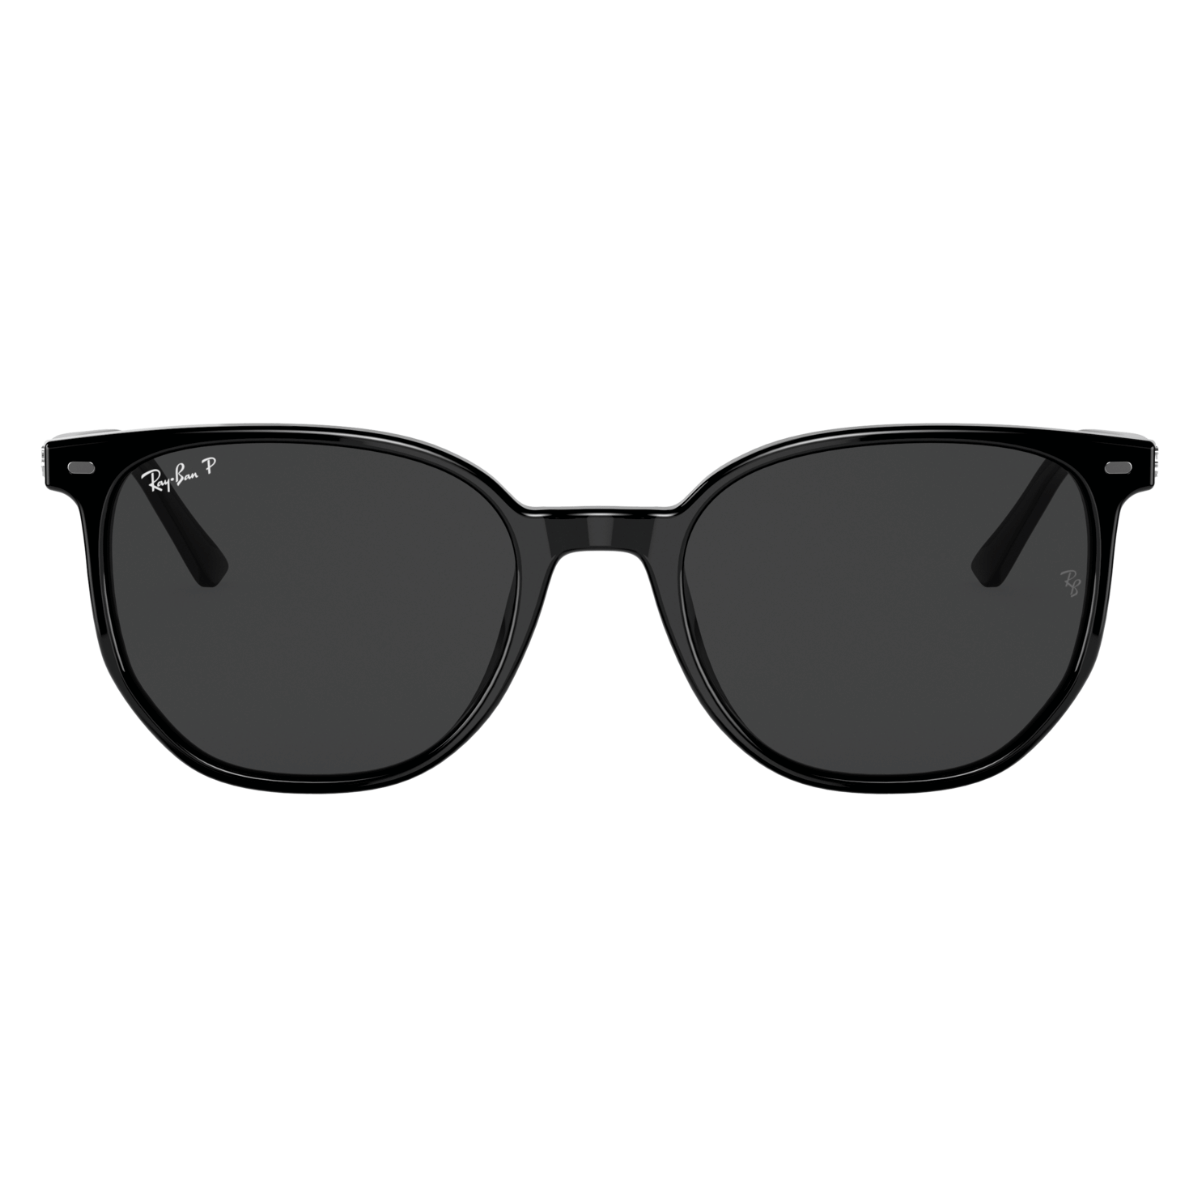 "Protect your eyes in style with Ray Ban RB2197 Polarised Grey Square Unisex Sunglasses from Optorium. Explore our selection of fashionable Ray Ban eyewear and order sunglasses online at the best rates. Experience the iconic appeal of Ray Ban sunglasses for men and women."